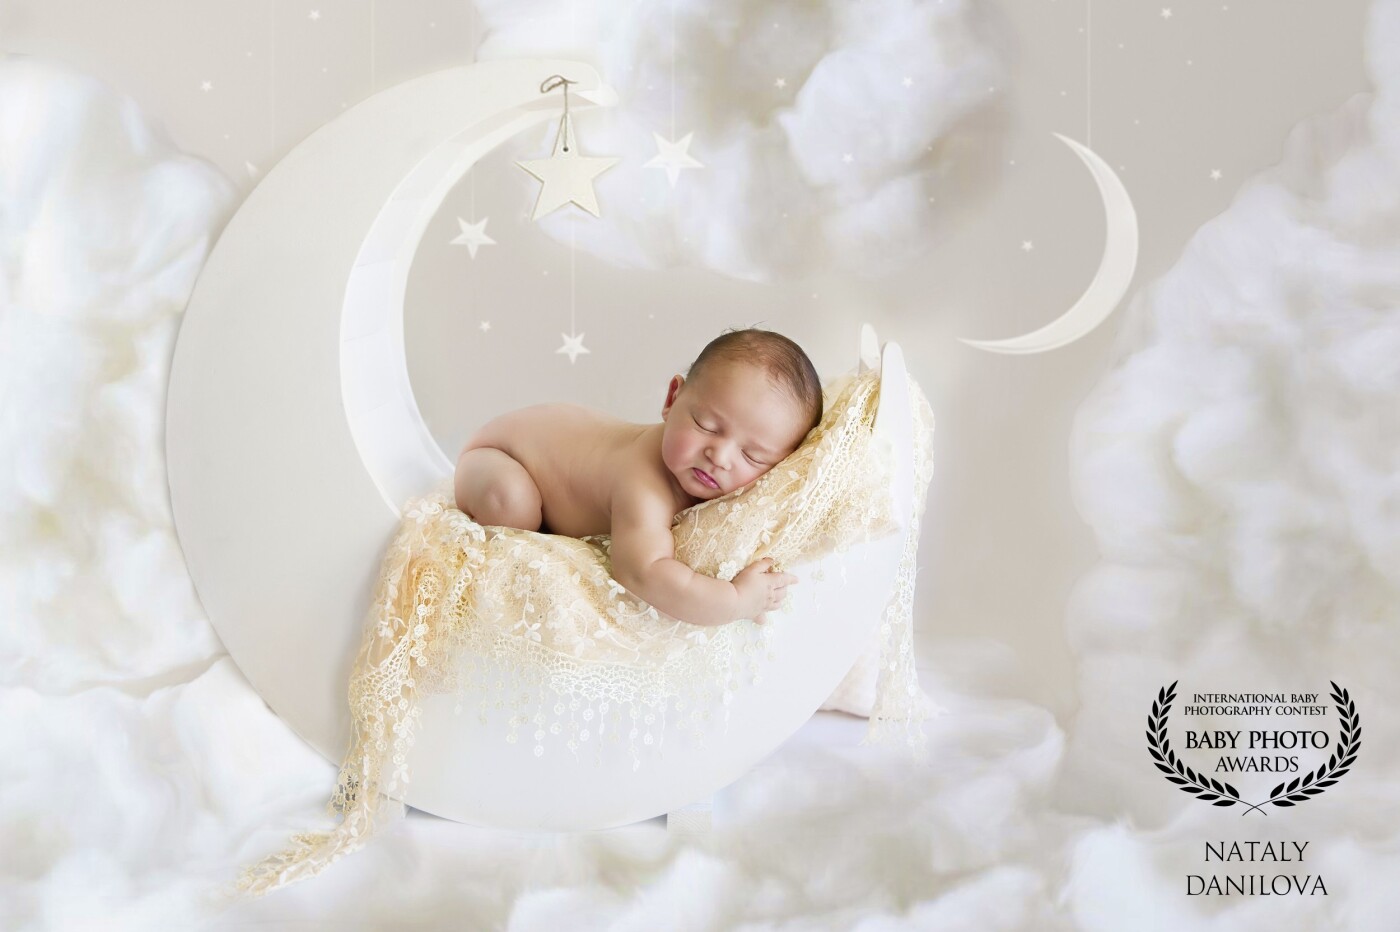 How handsome is this little guy?! Oh my goodness! Baby Mateo is just 8 days old in these photos, and he was just the most smiley and fun little guy throughout his whole session.  He was so easy to pose, even on the moon!